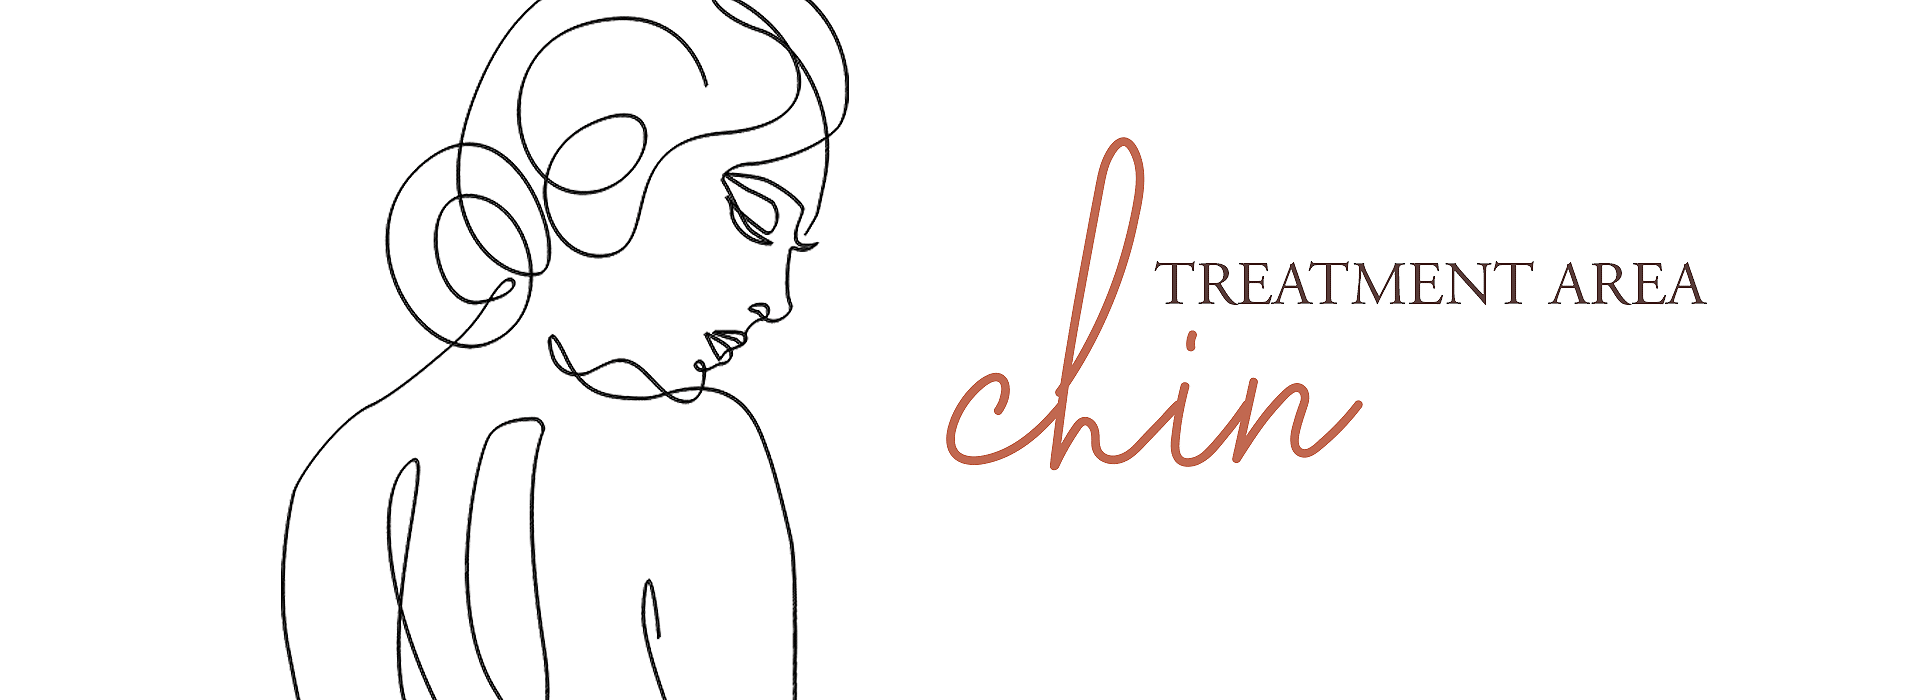 aesthetic treatments for chin